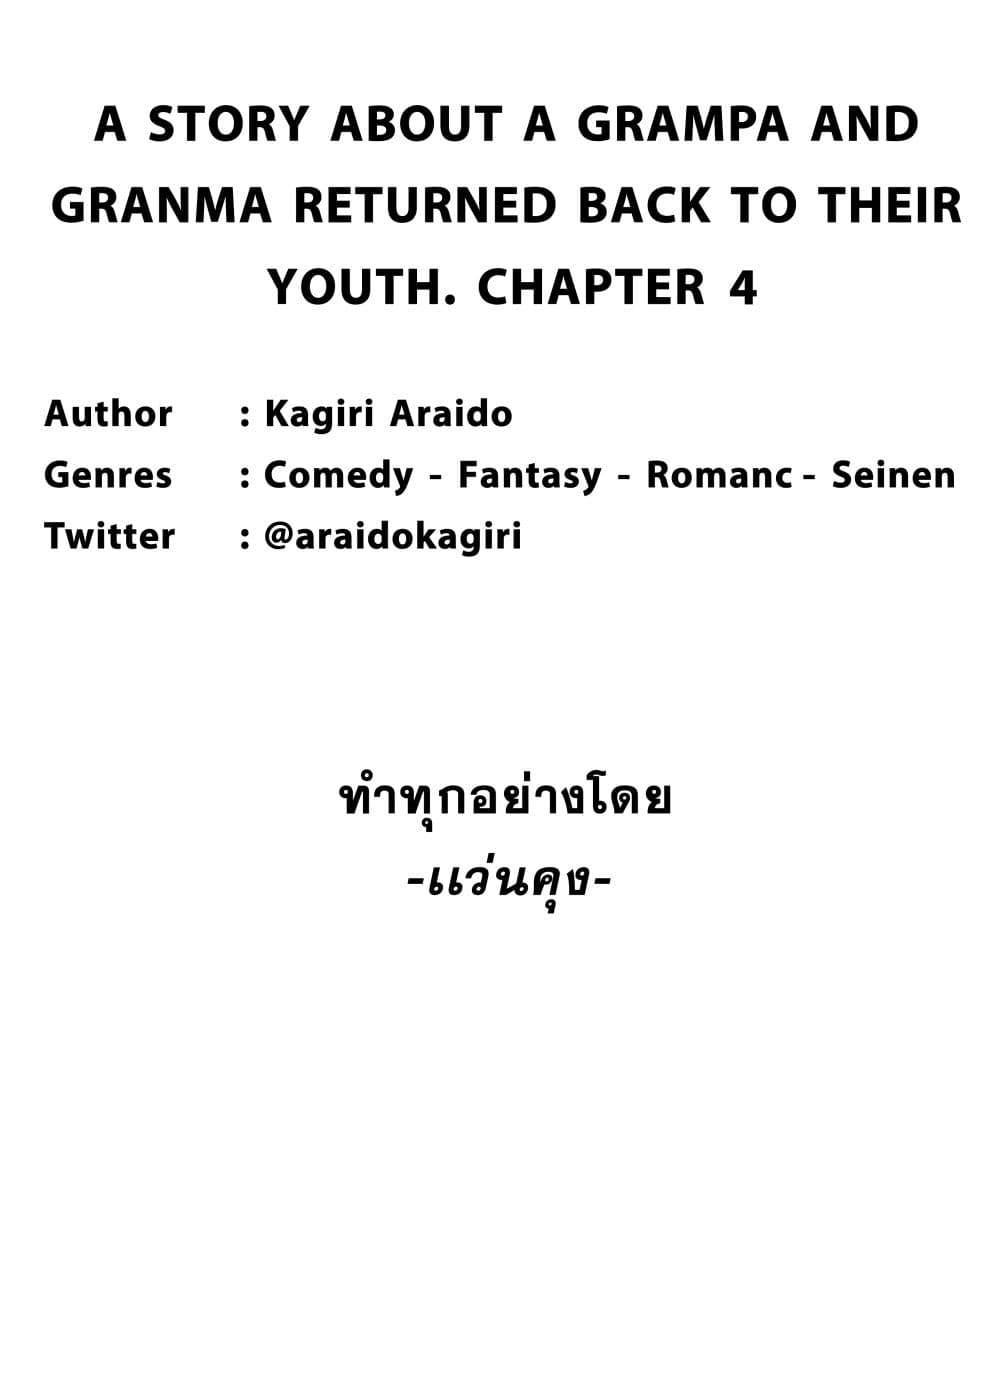 A Story About A Grampa and Granma Returned Back to their Youth คู่รักวัยดึกหวนคืนวัยหวาน 4-4